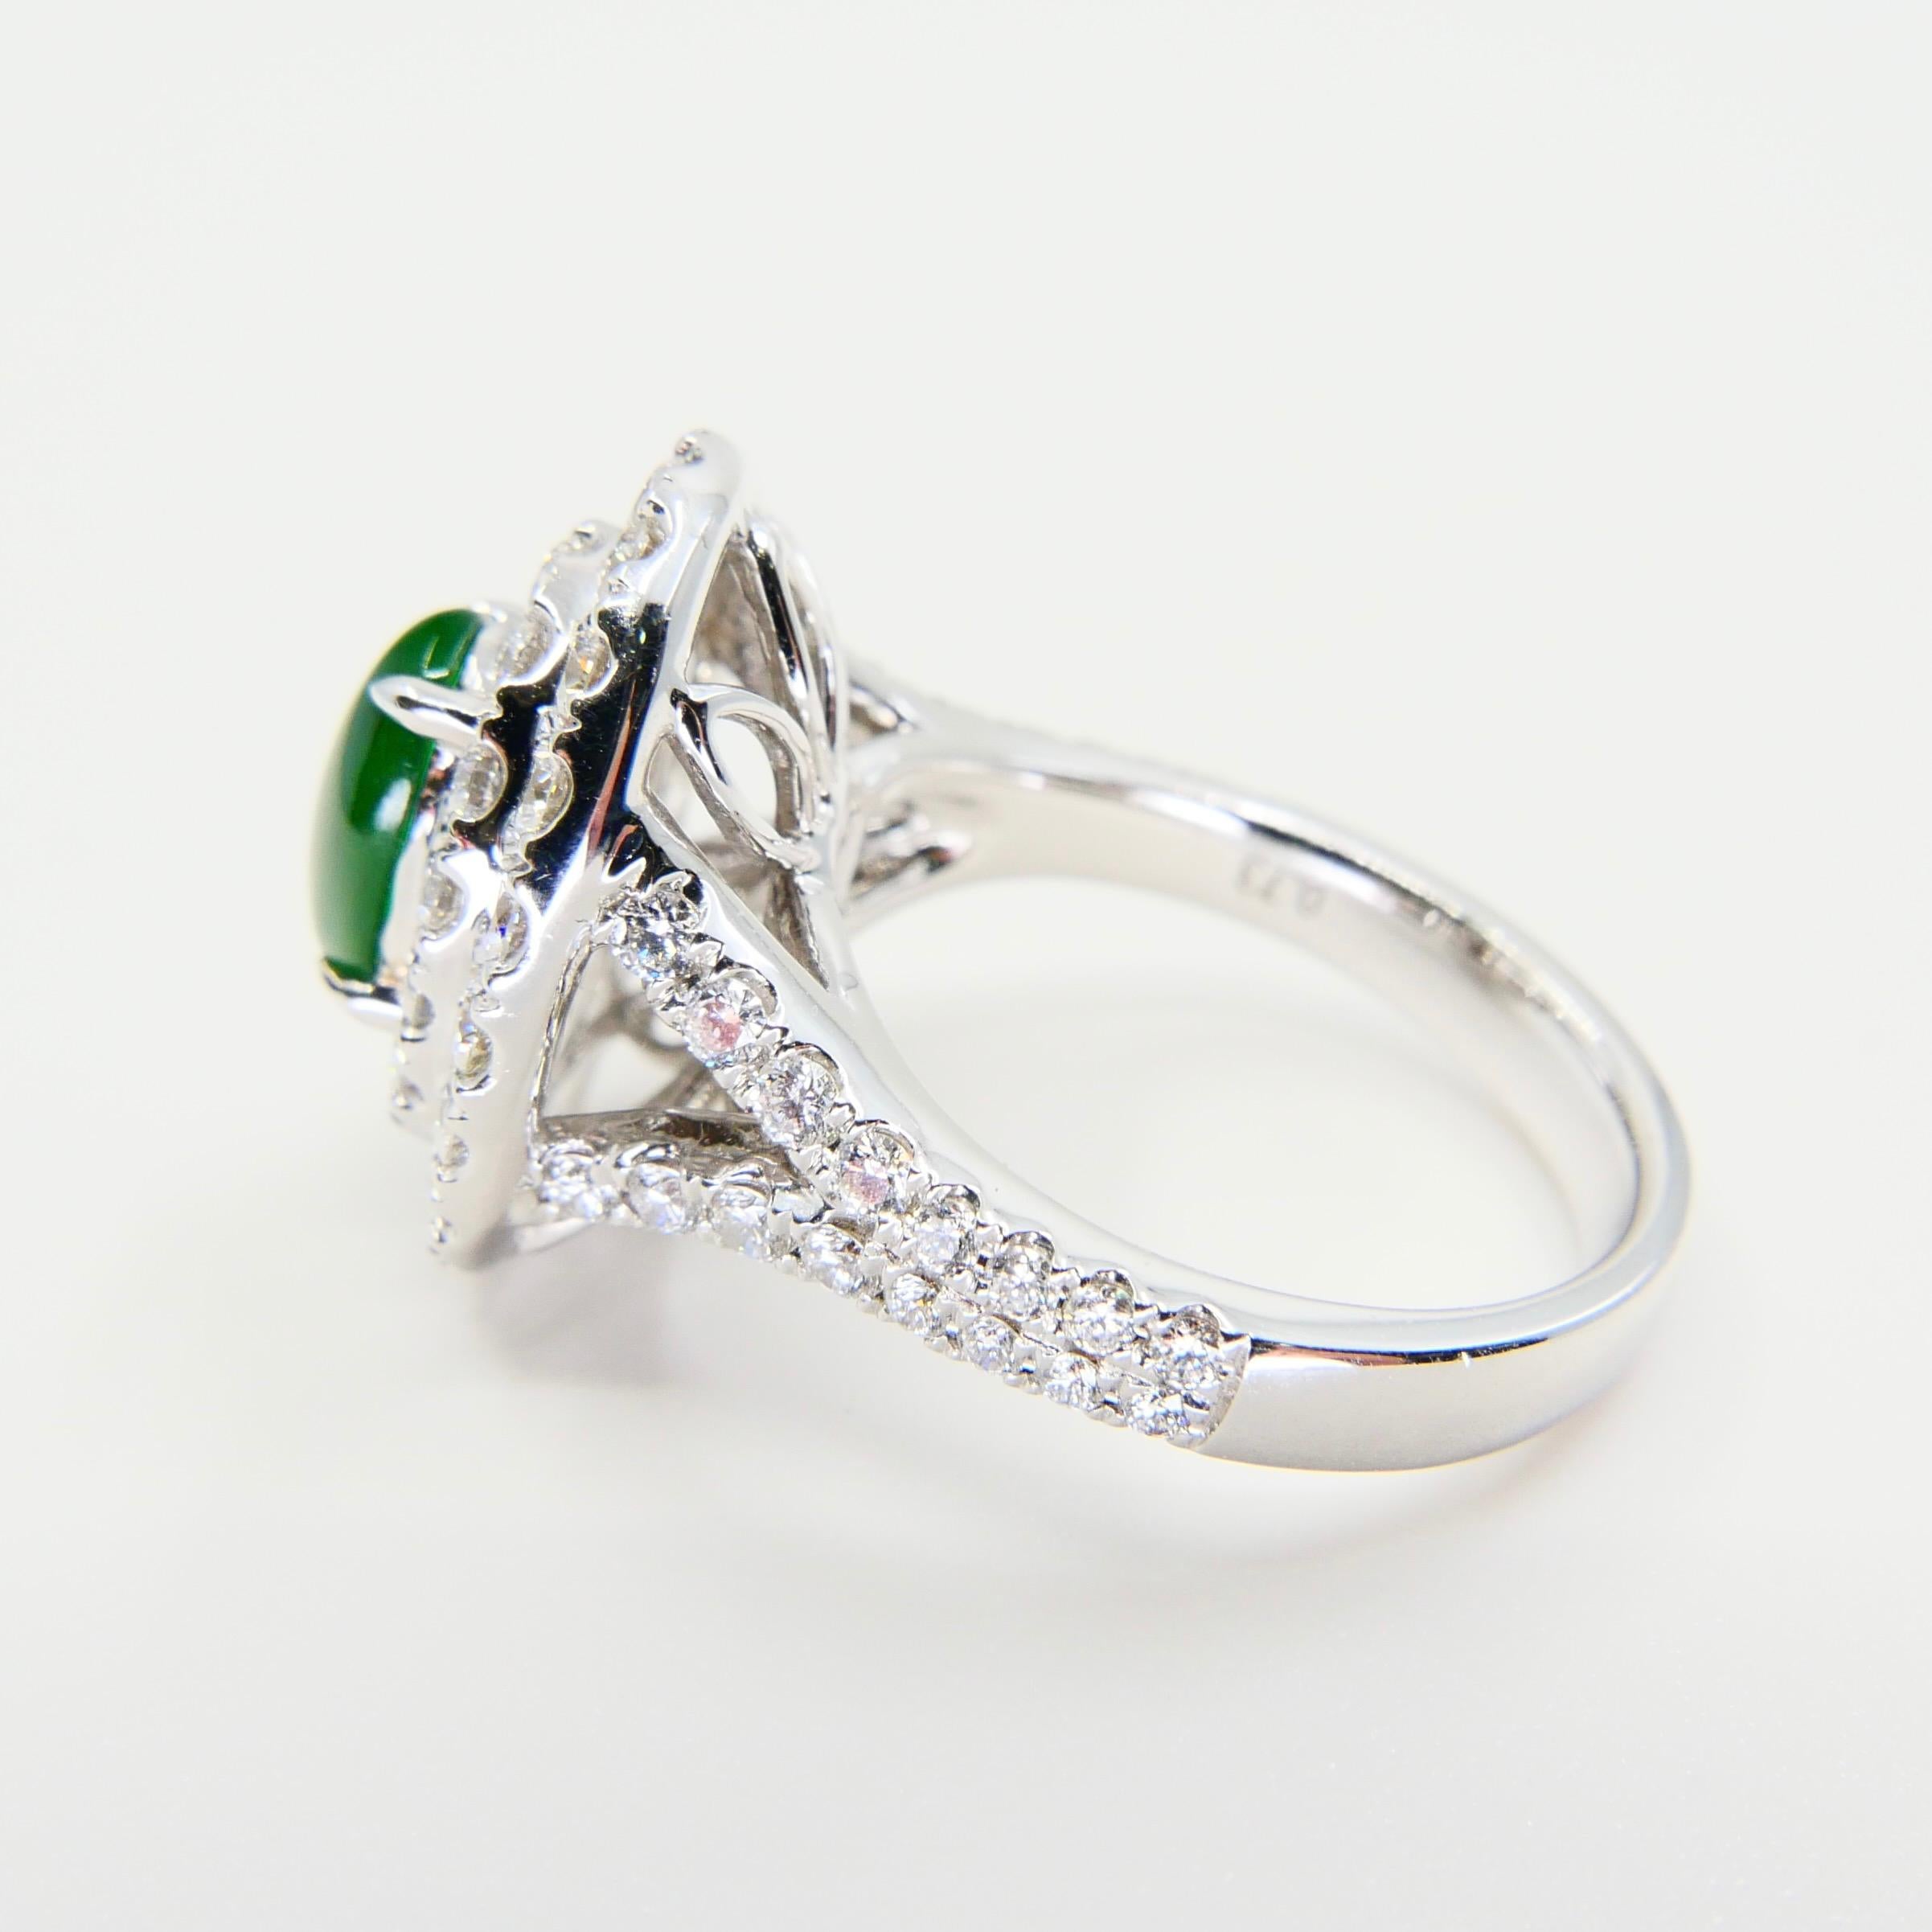 Certified Type A Jadeite Jade and Diamond Cocktail Ring, Close to Imperial Jade 5